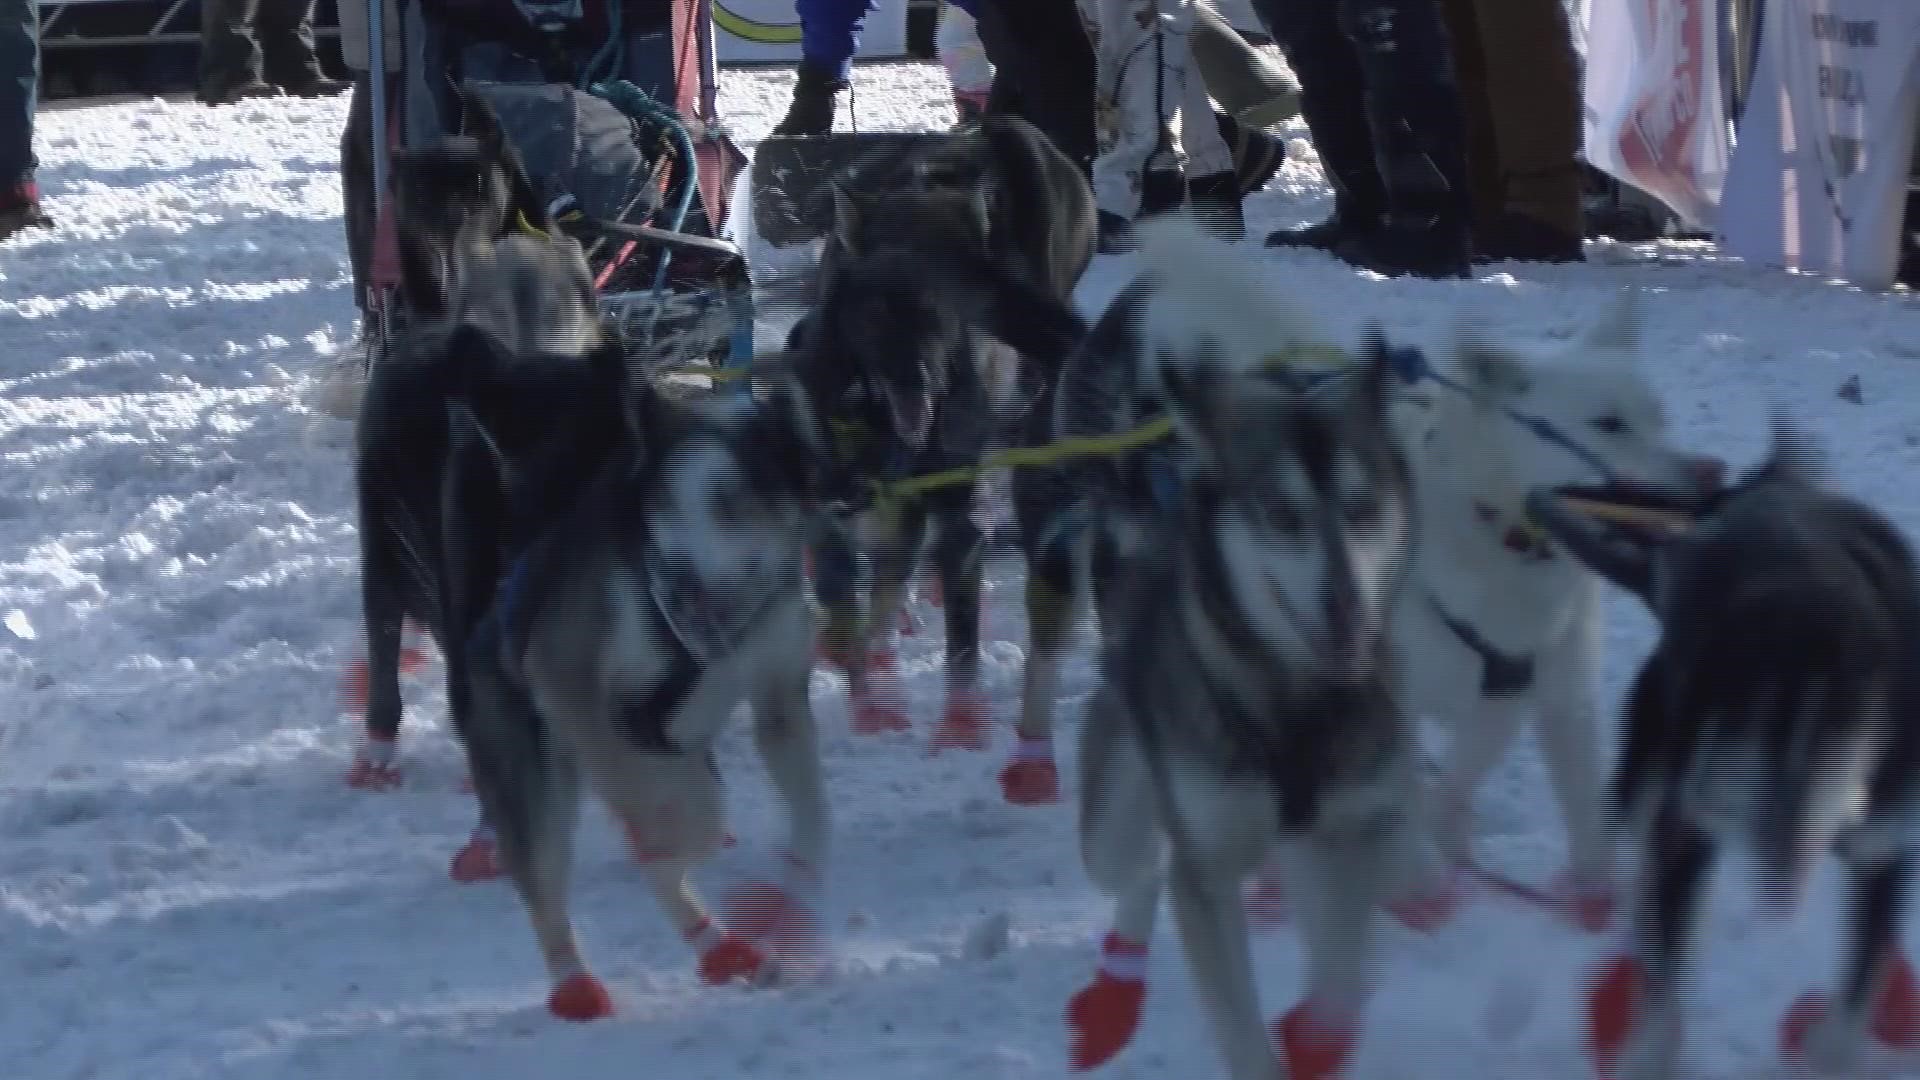 The longest sled dog race in the lower 48 states got underway Sunday, with fans back on the course after missing the '21 edition due to COVID.